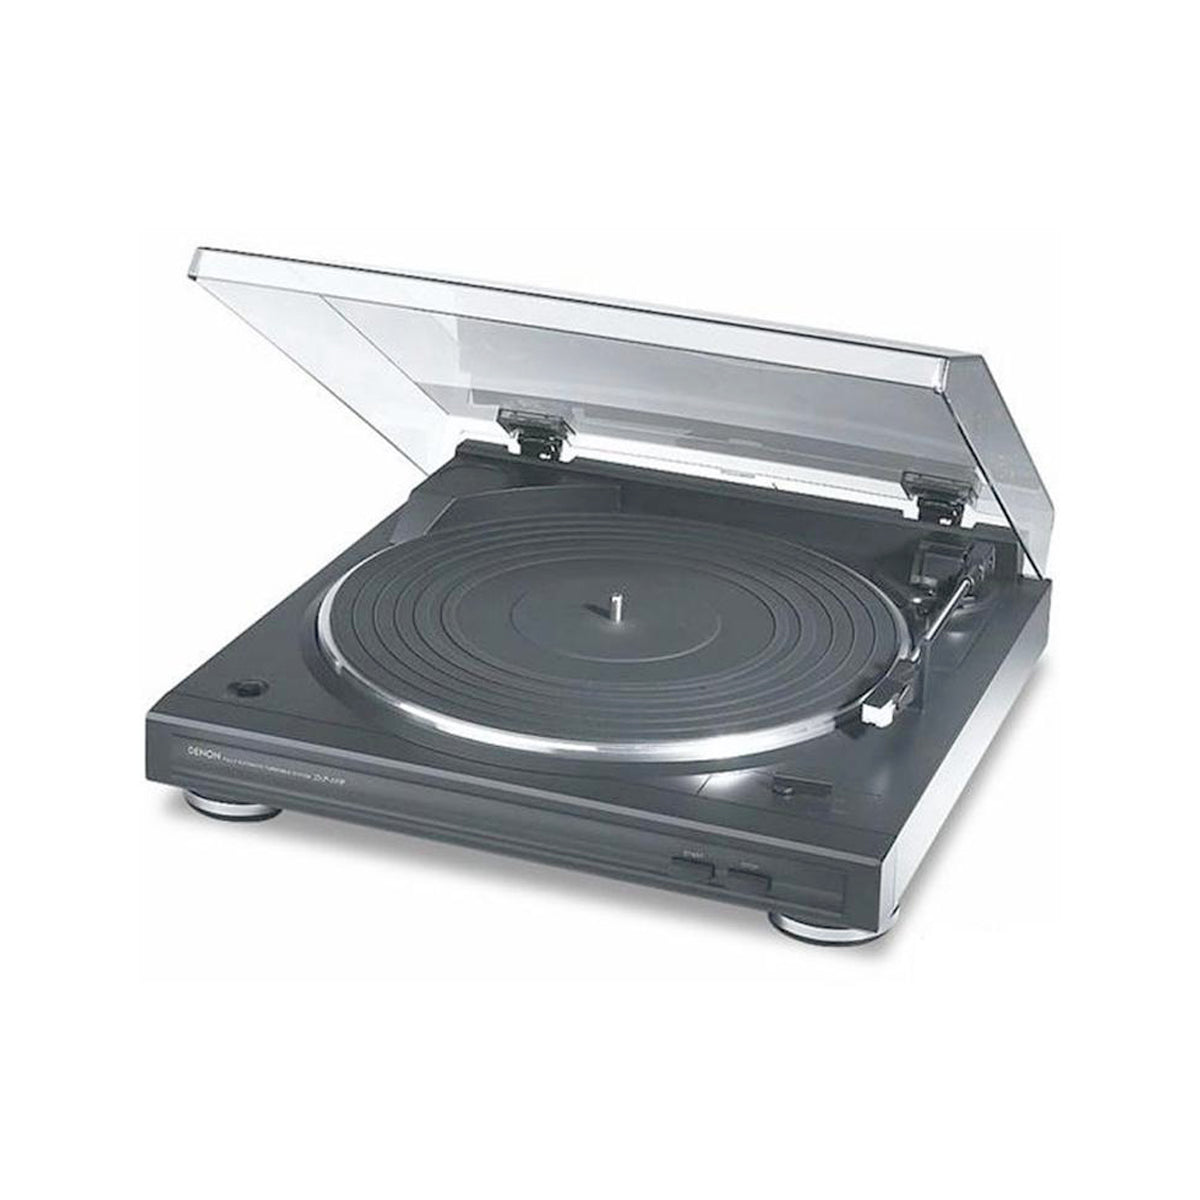 Denon DP29F Fully Automatic Turntable - The Audio Experts